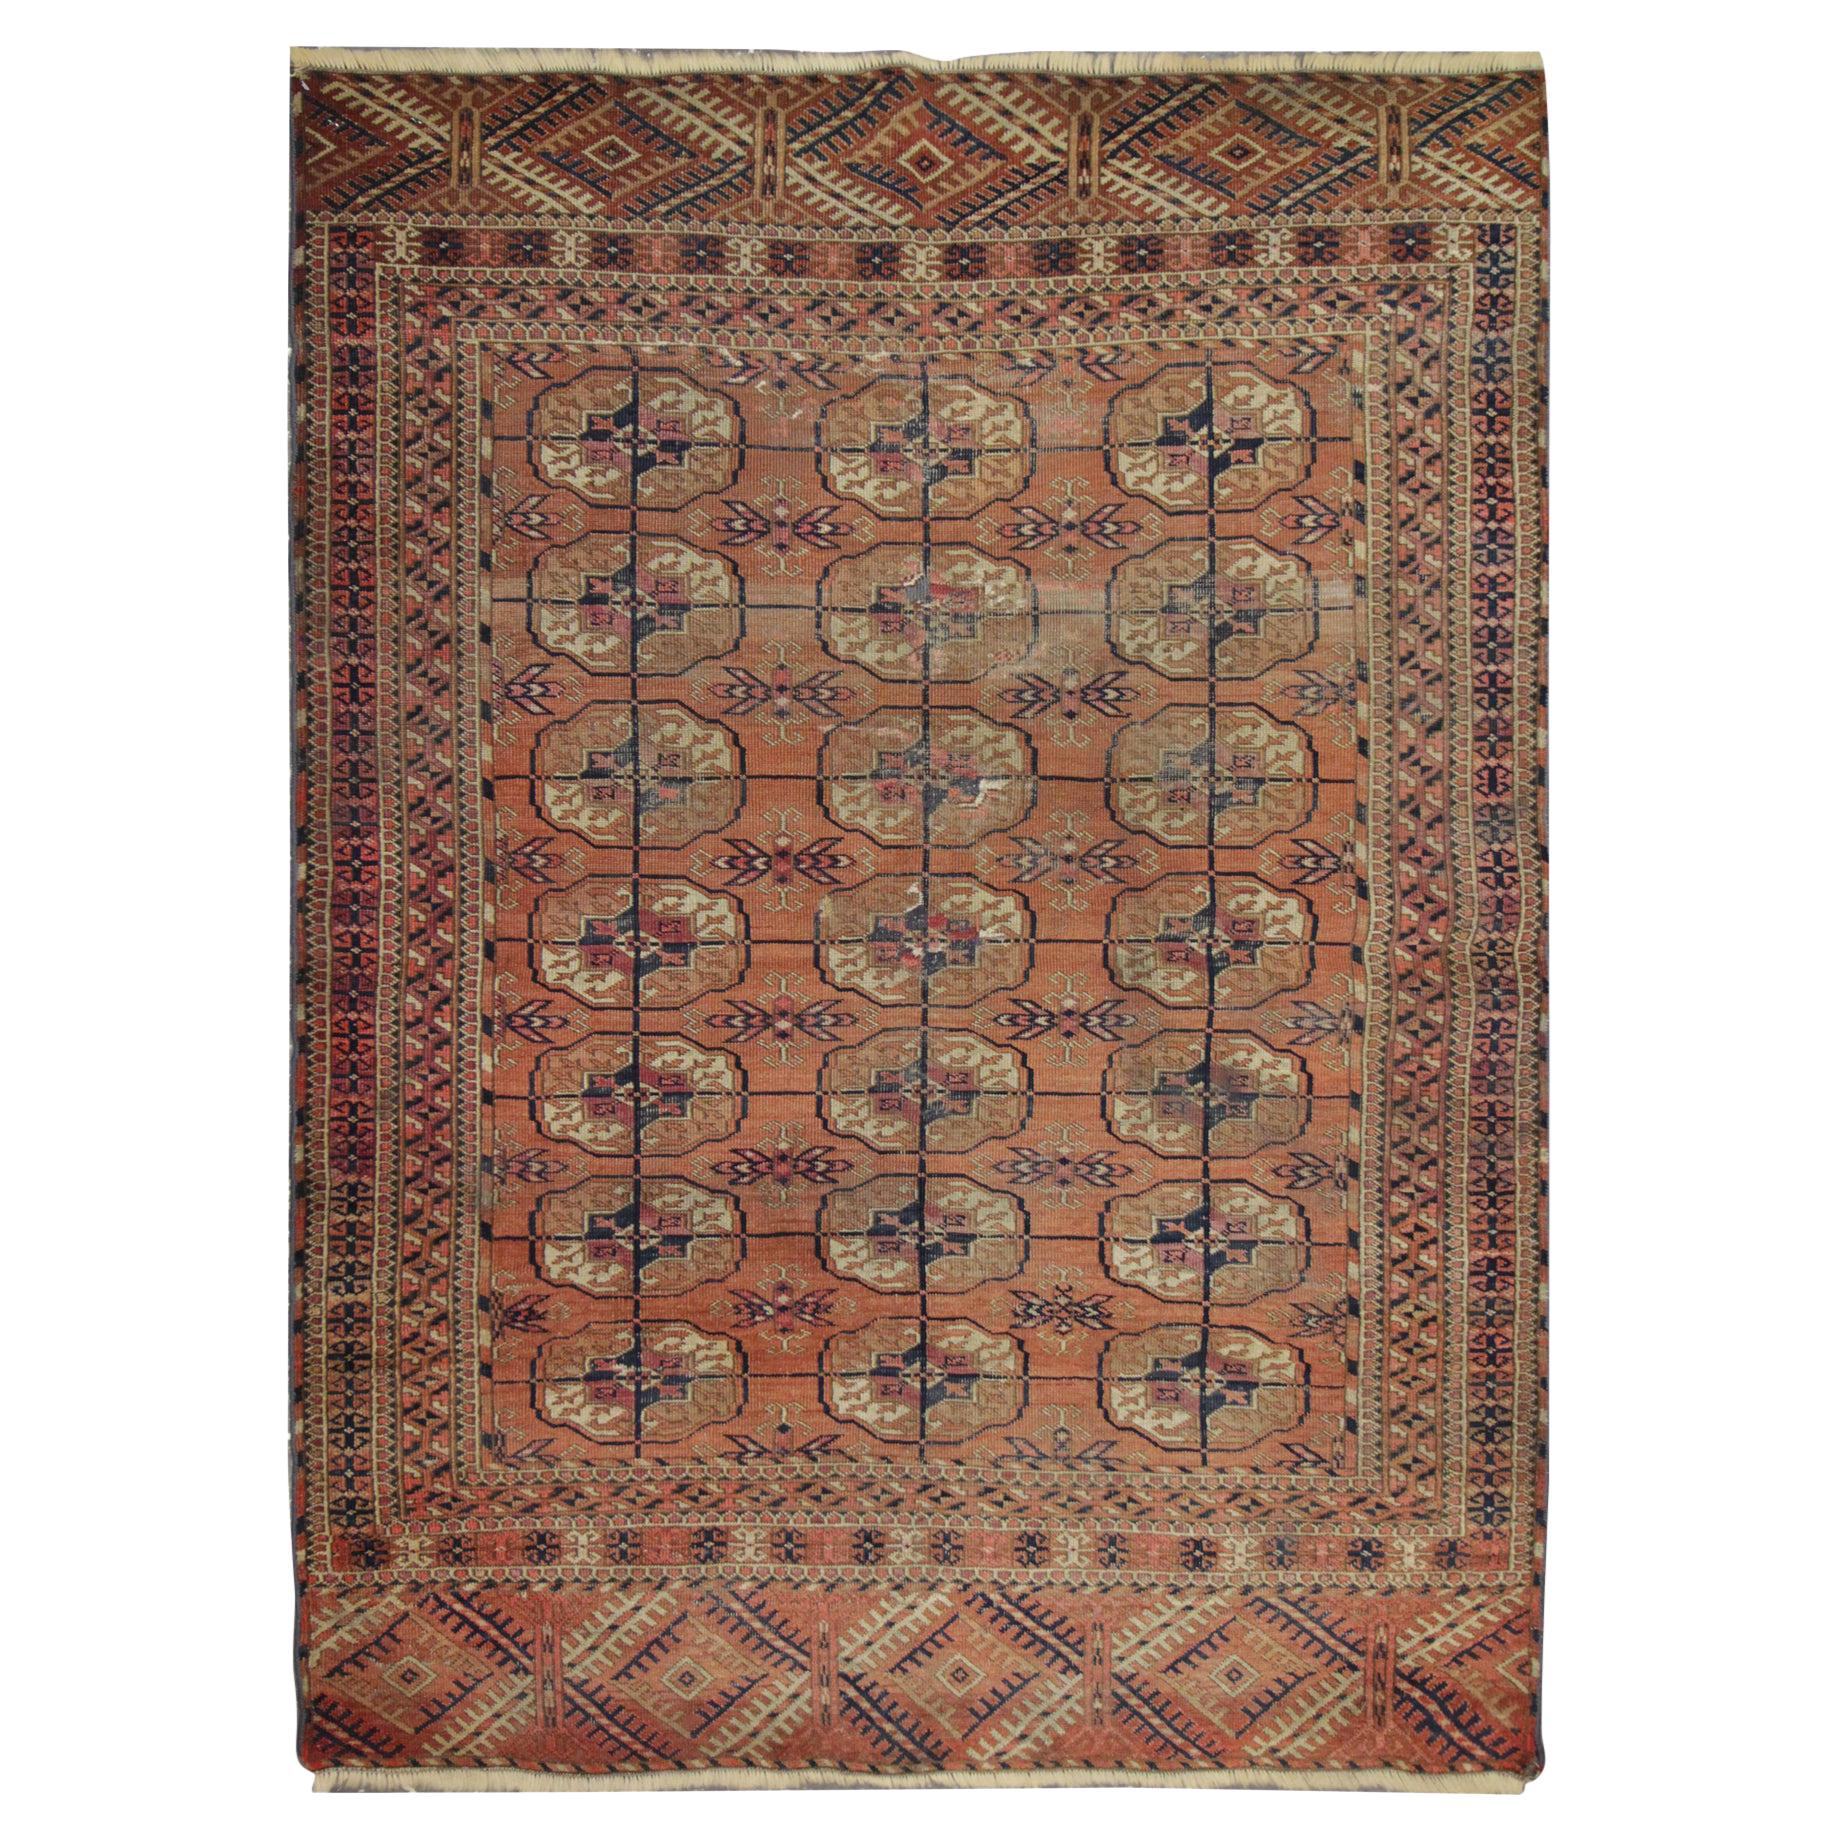 Handmade Carpet Antique Rugs Traditional Orange Wool Area Rug For Sale